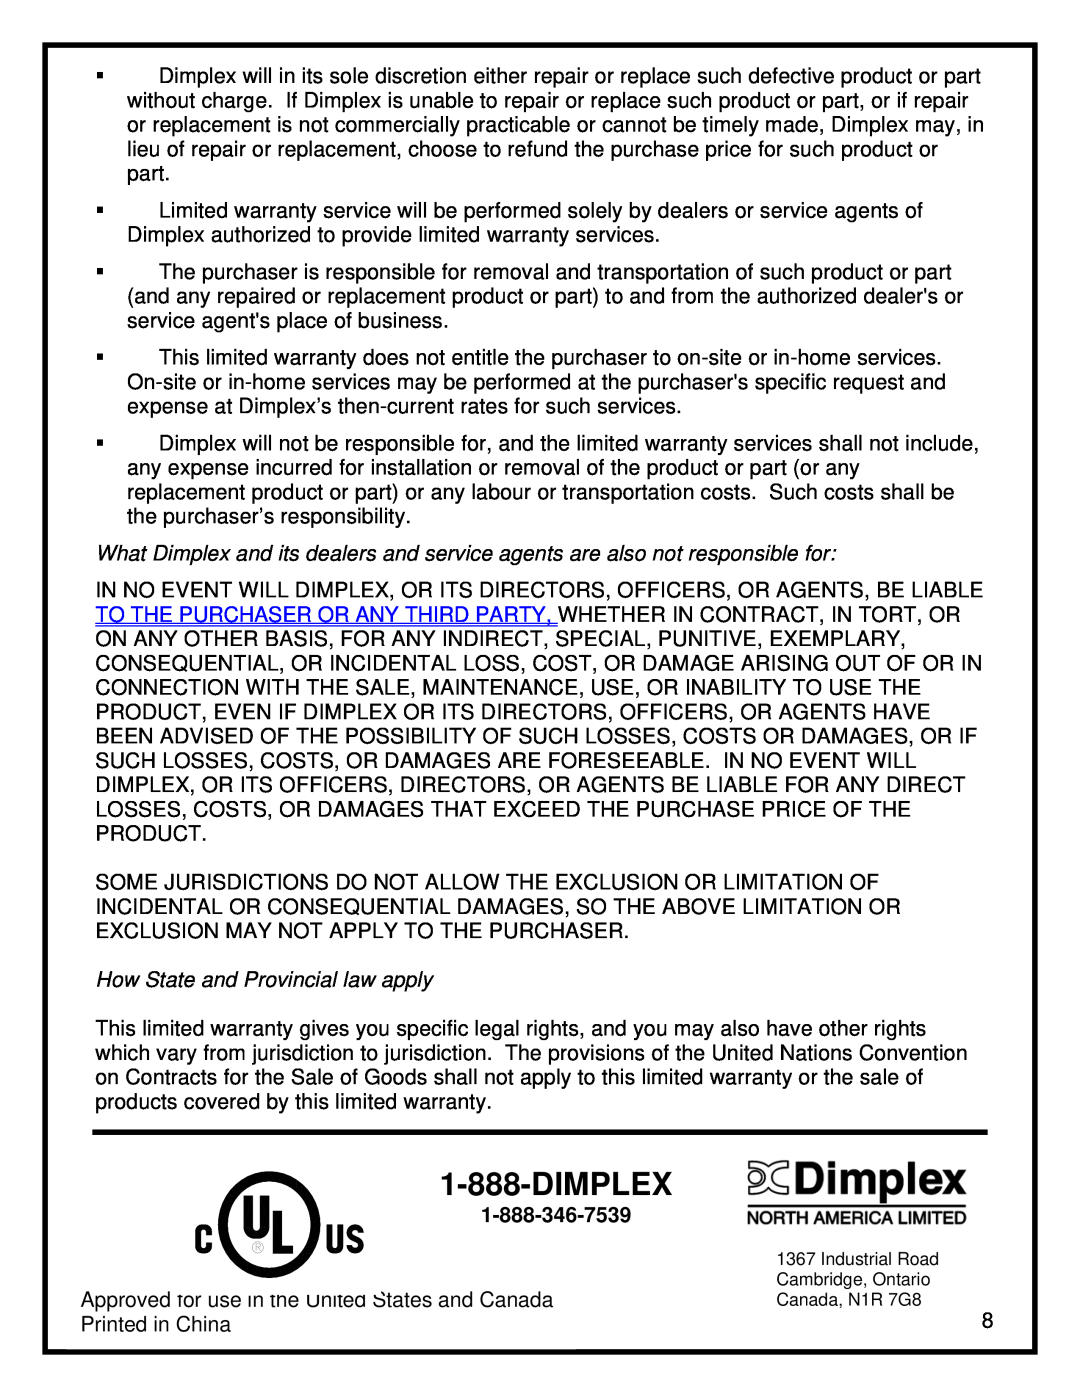 Dimplex THE ELECTRIC STOVE manual Dimplex, How State and Provincial law apply 